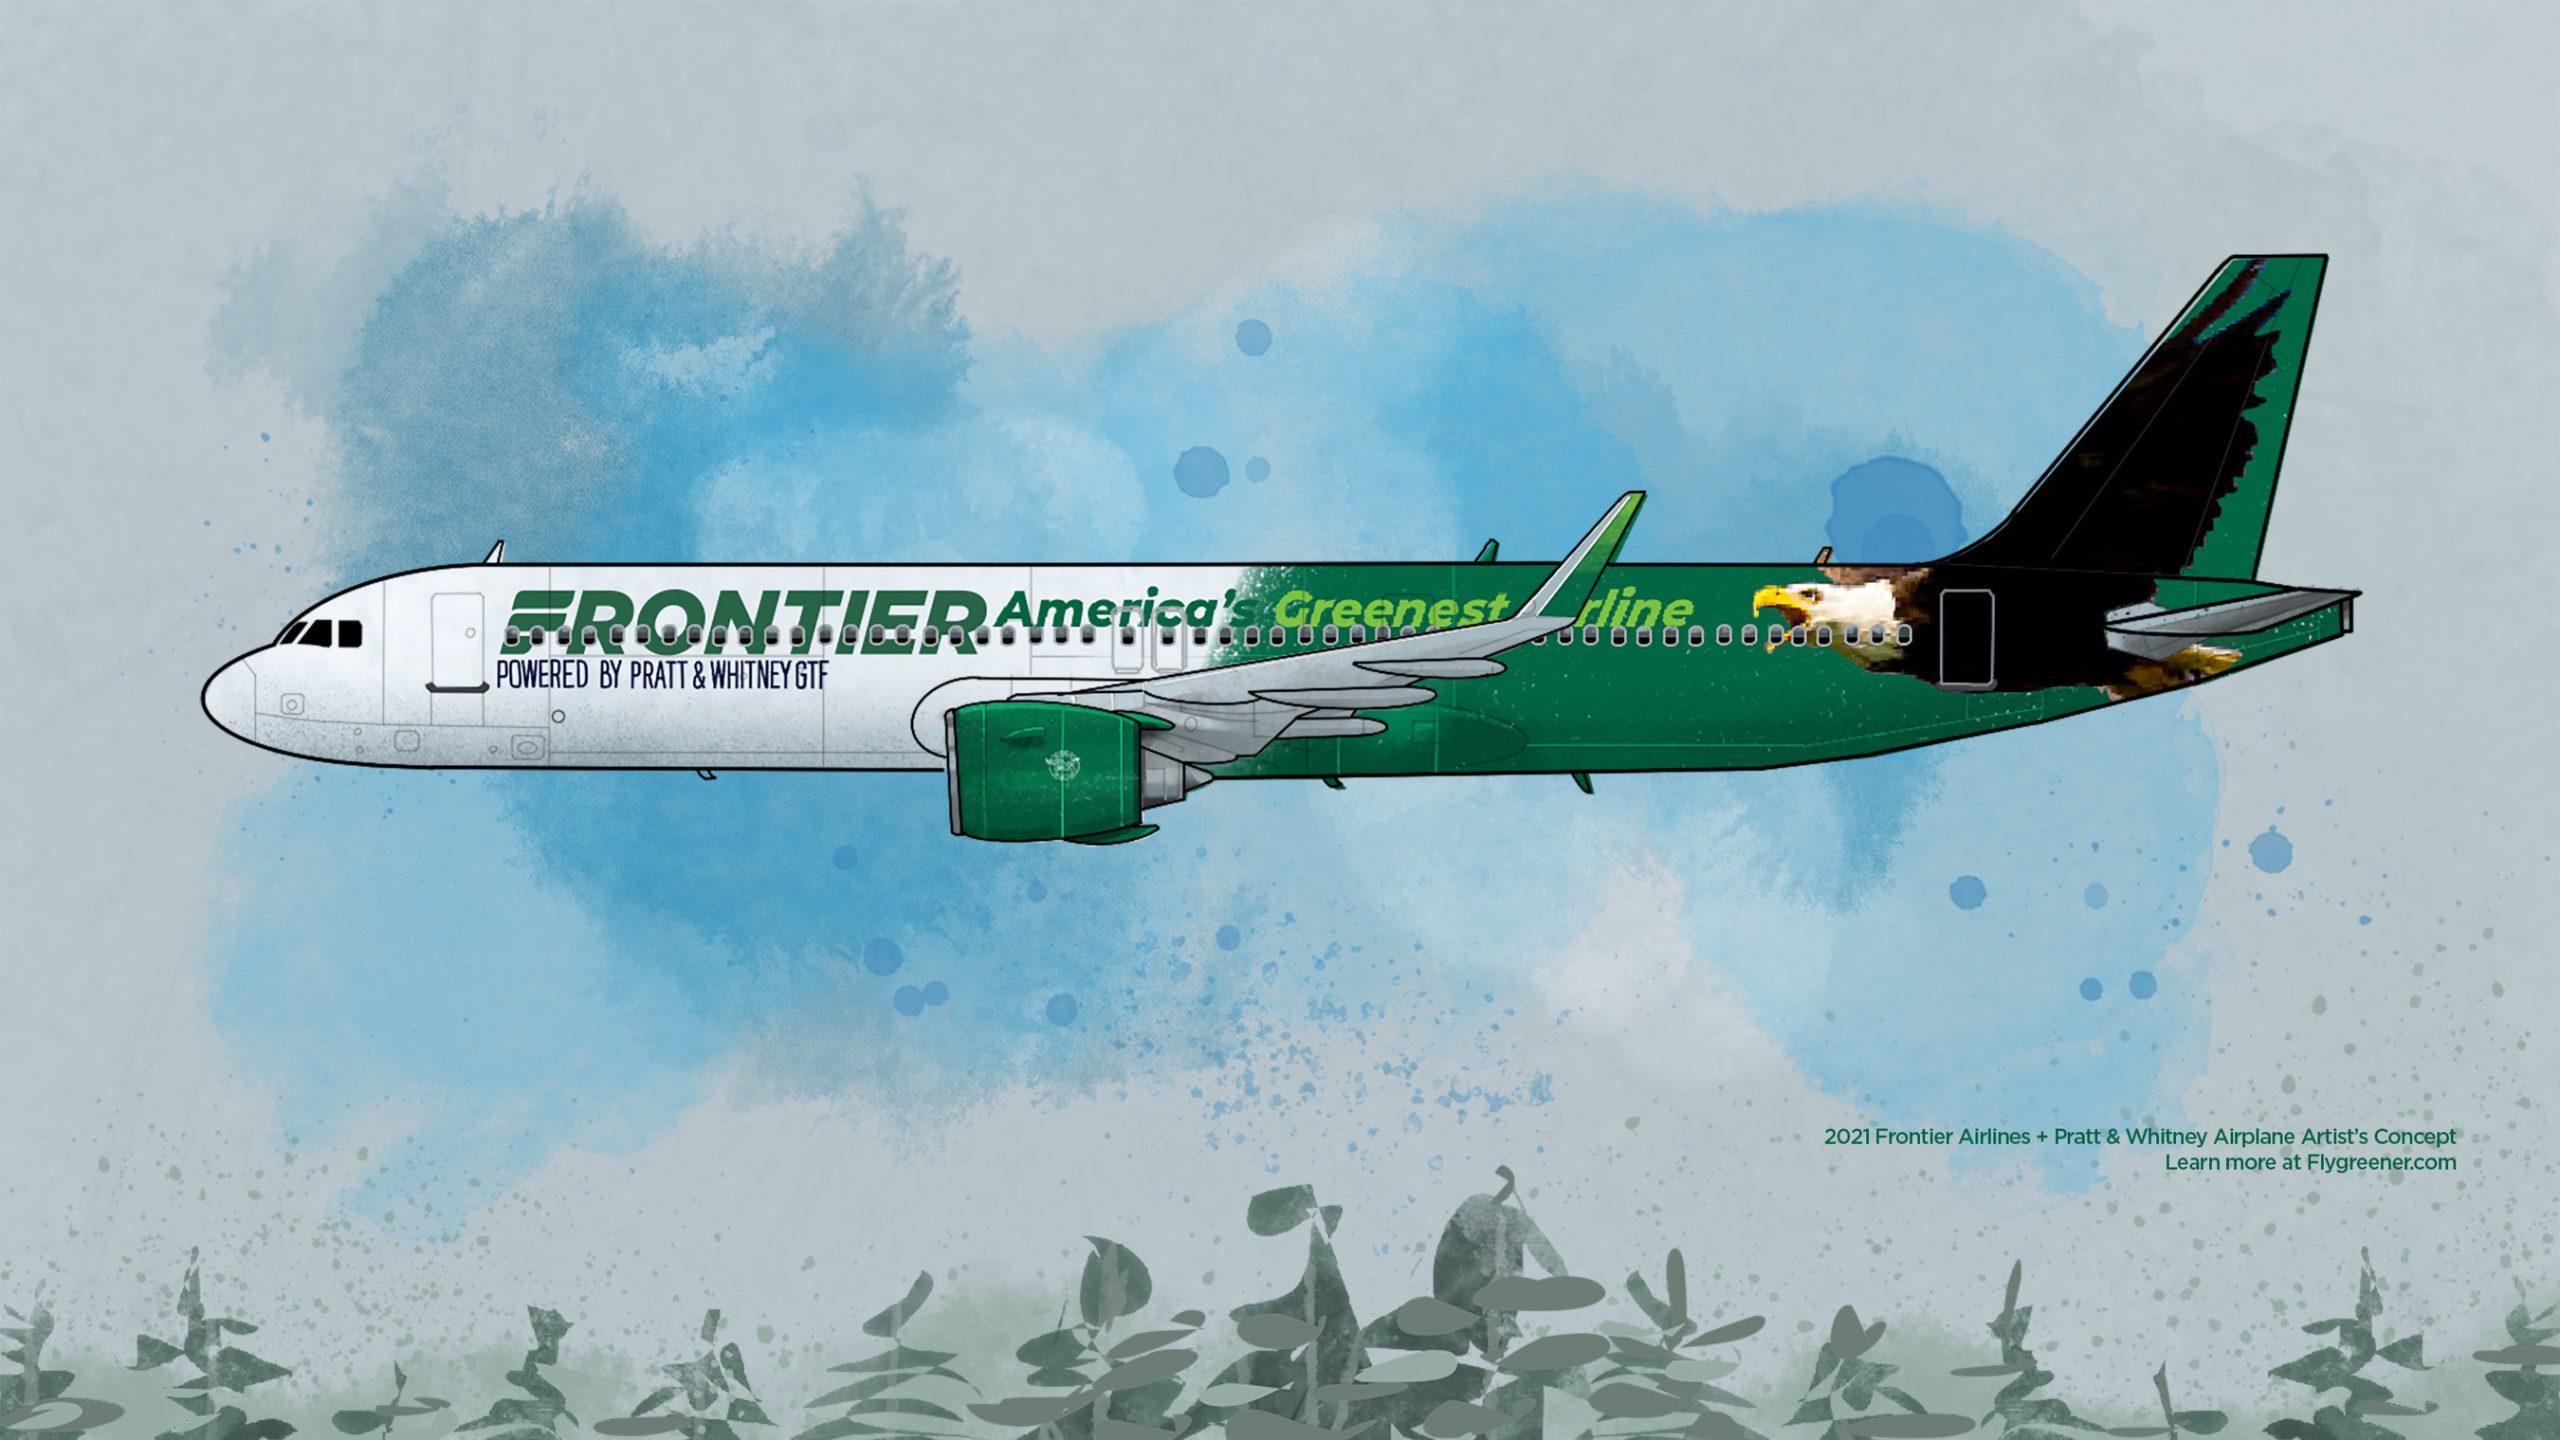 GTF Engines on Frontier Airlines’ 134 A320neo Family Aircraft